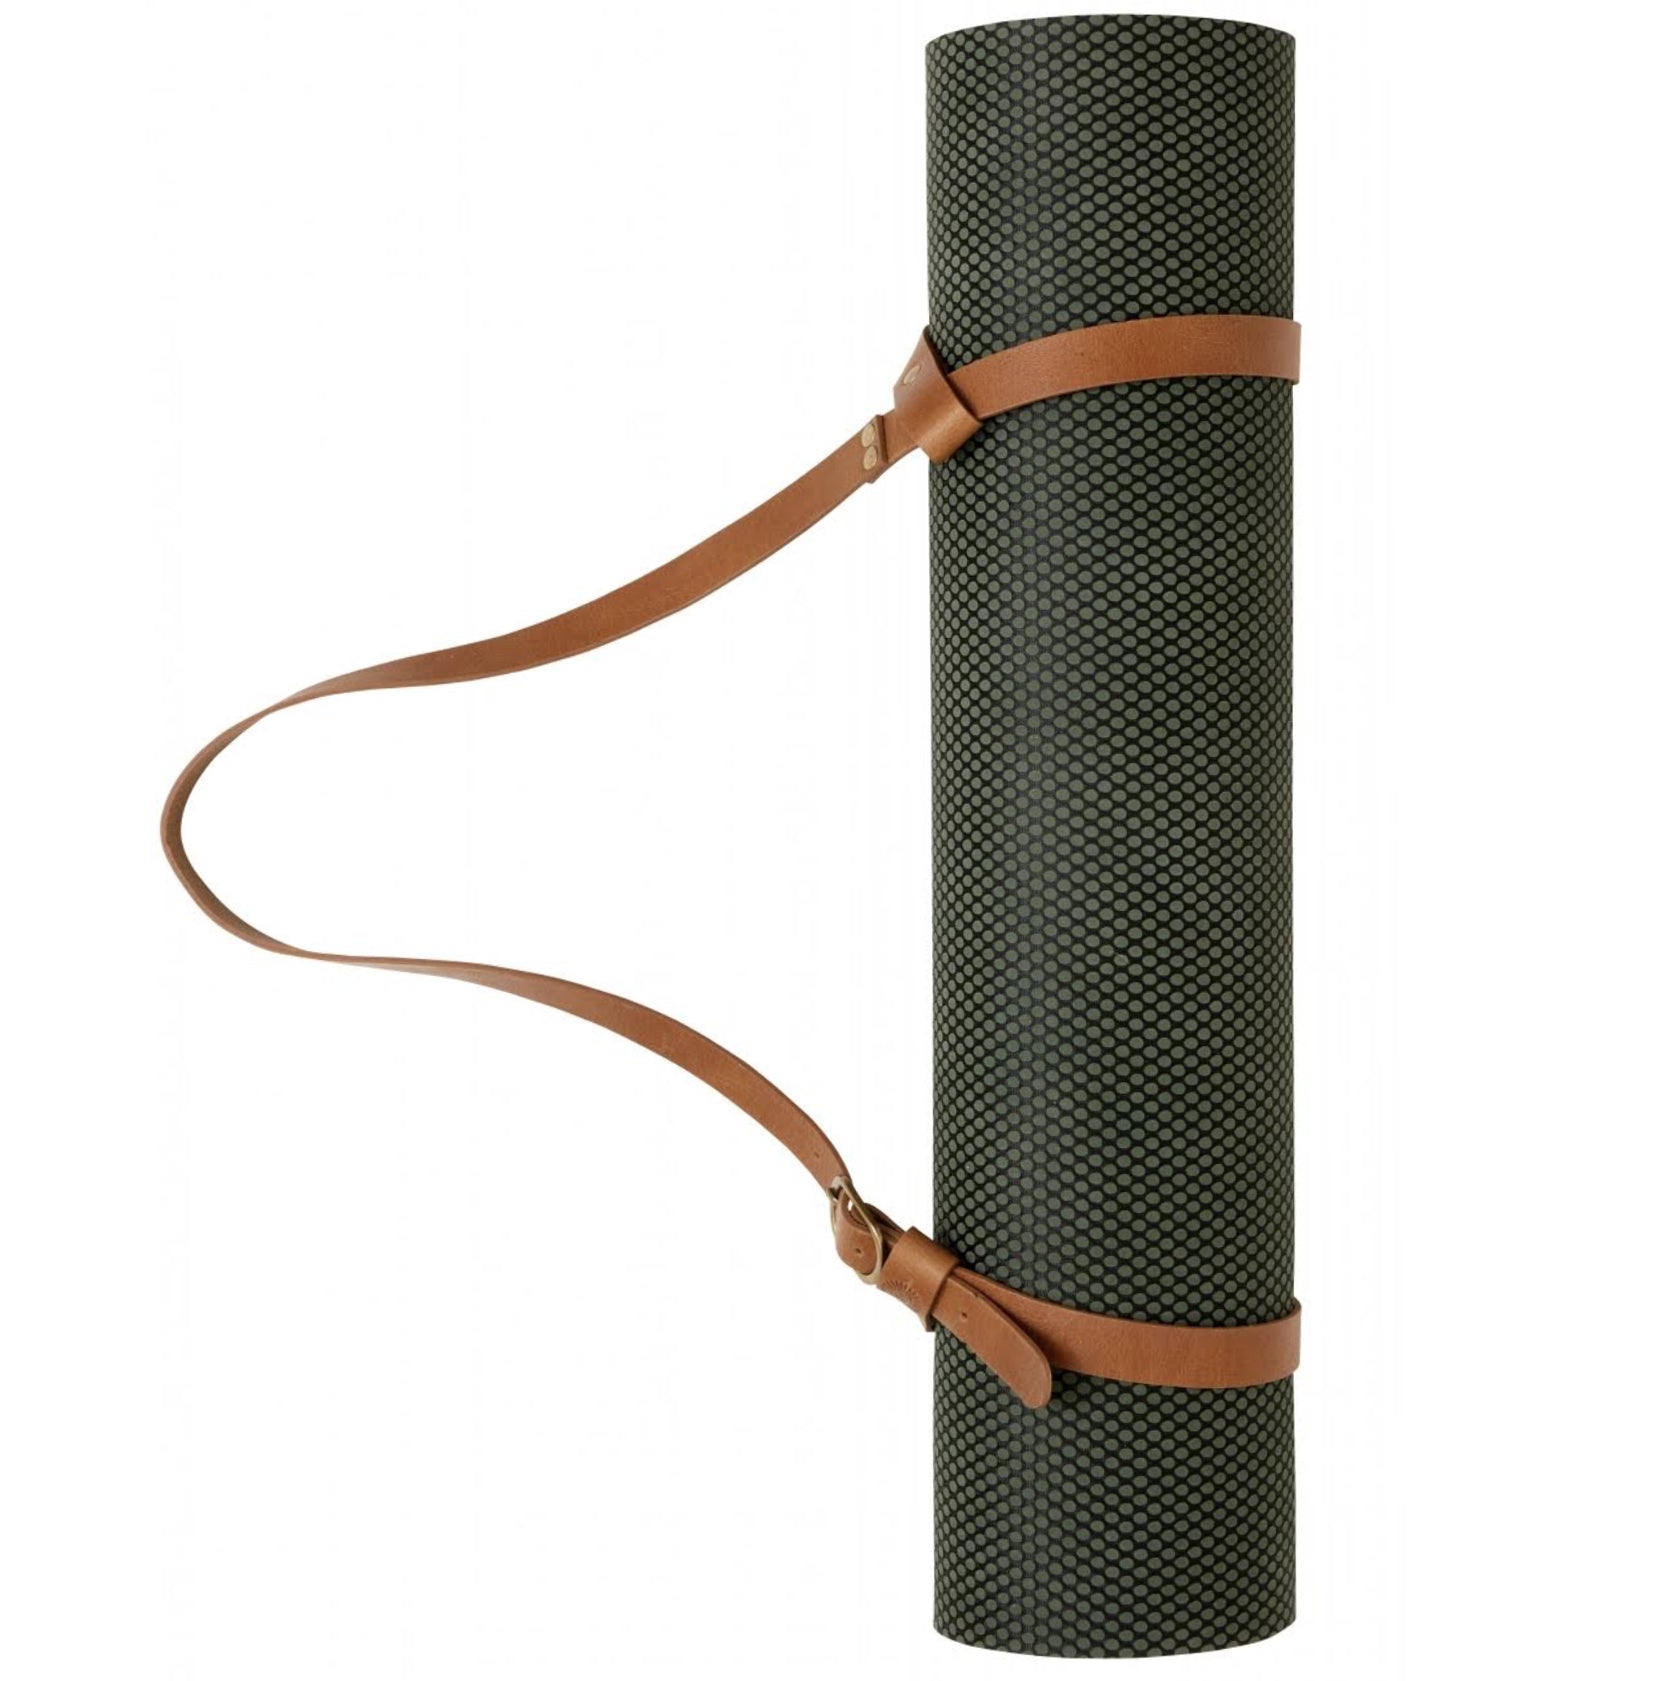 Brown Leather Strap For Yoga Mat